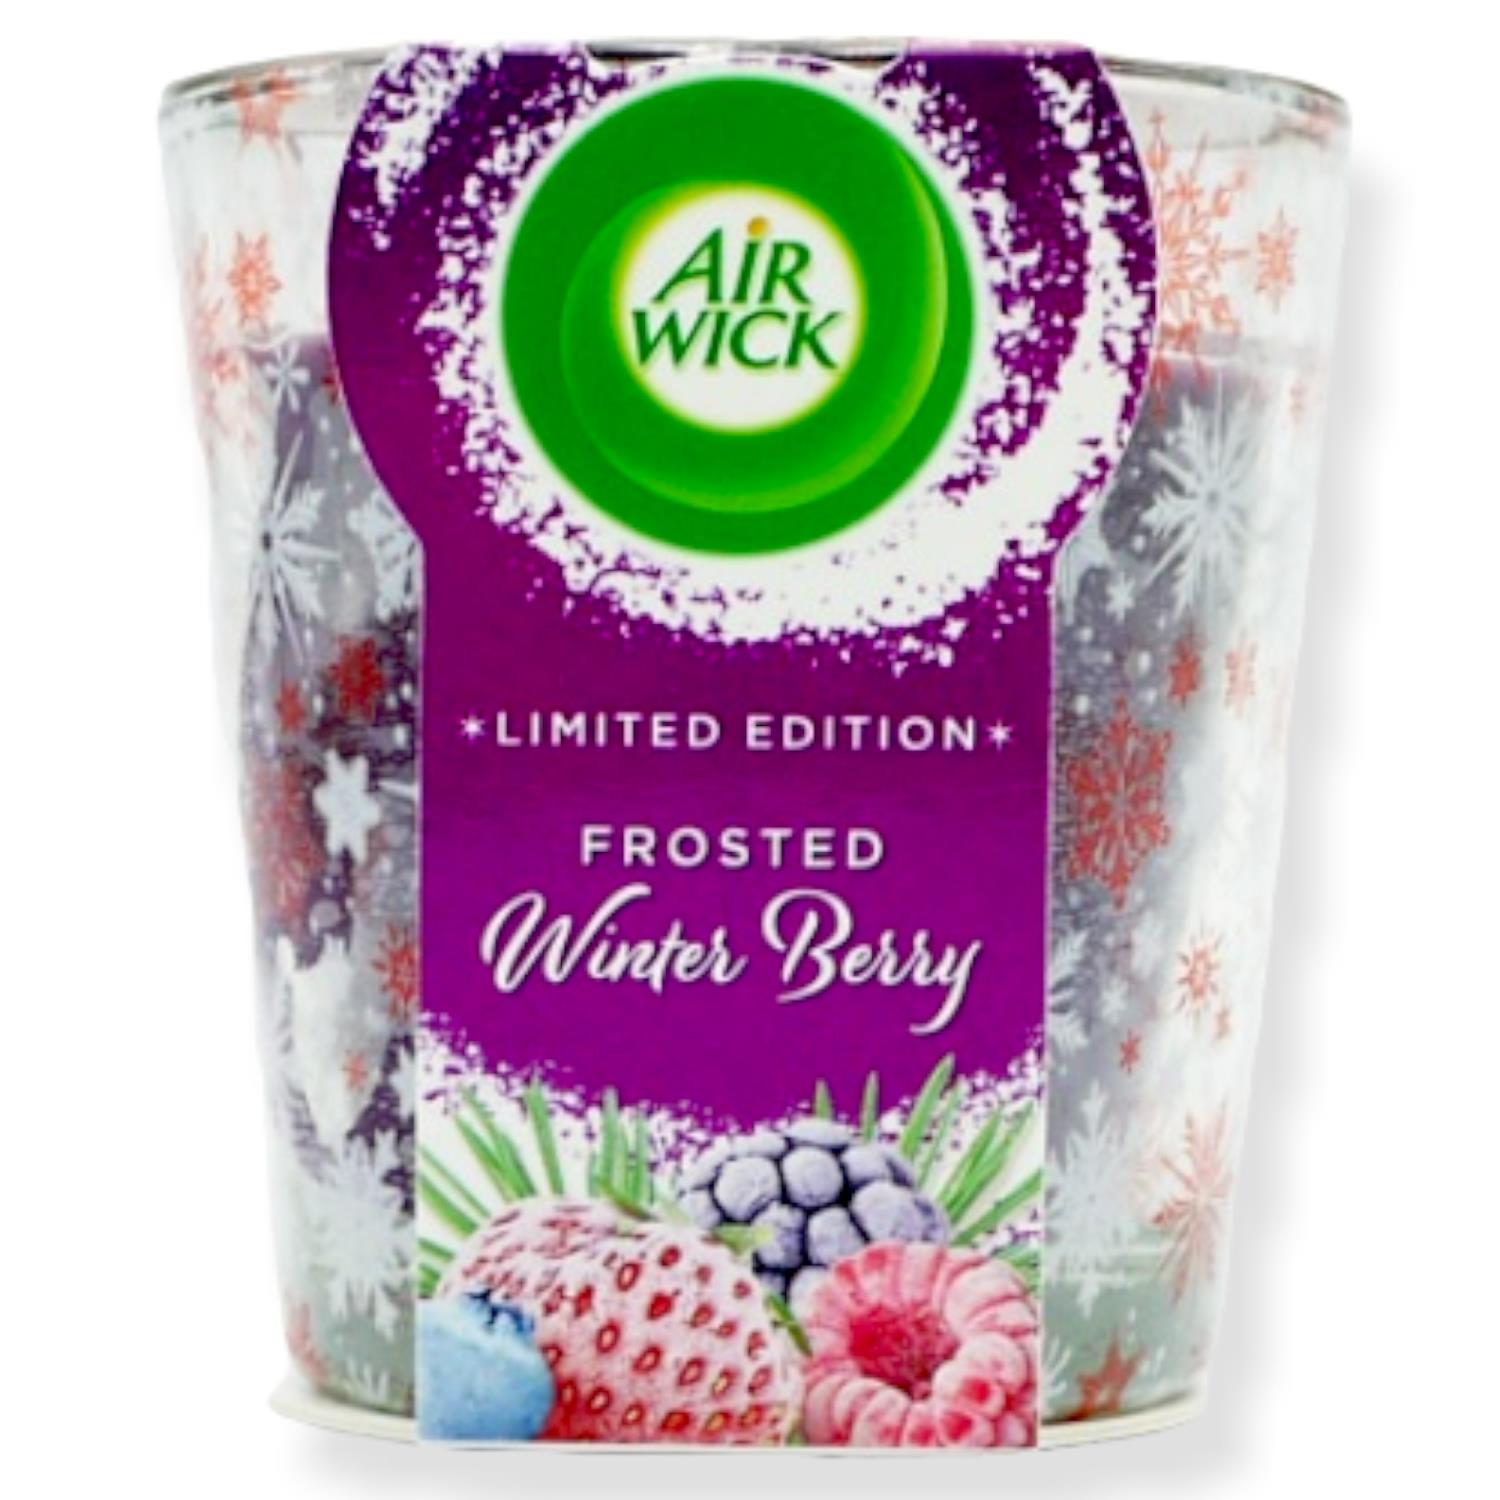 Air Wick Frosted Winter Berry Candle 105g